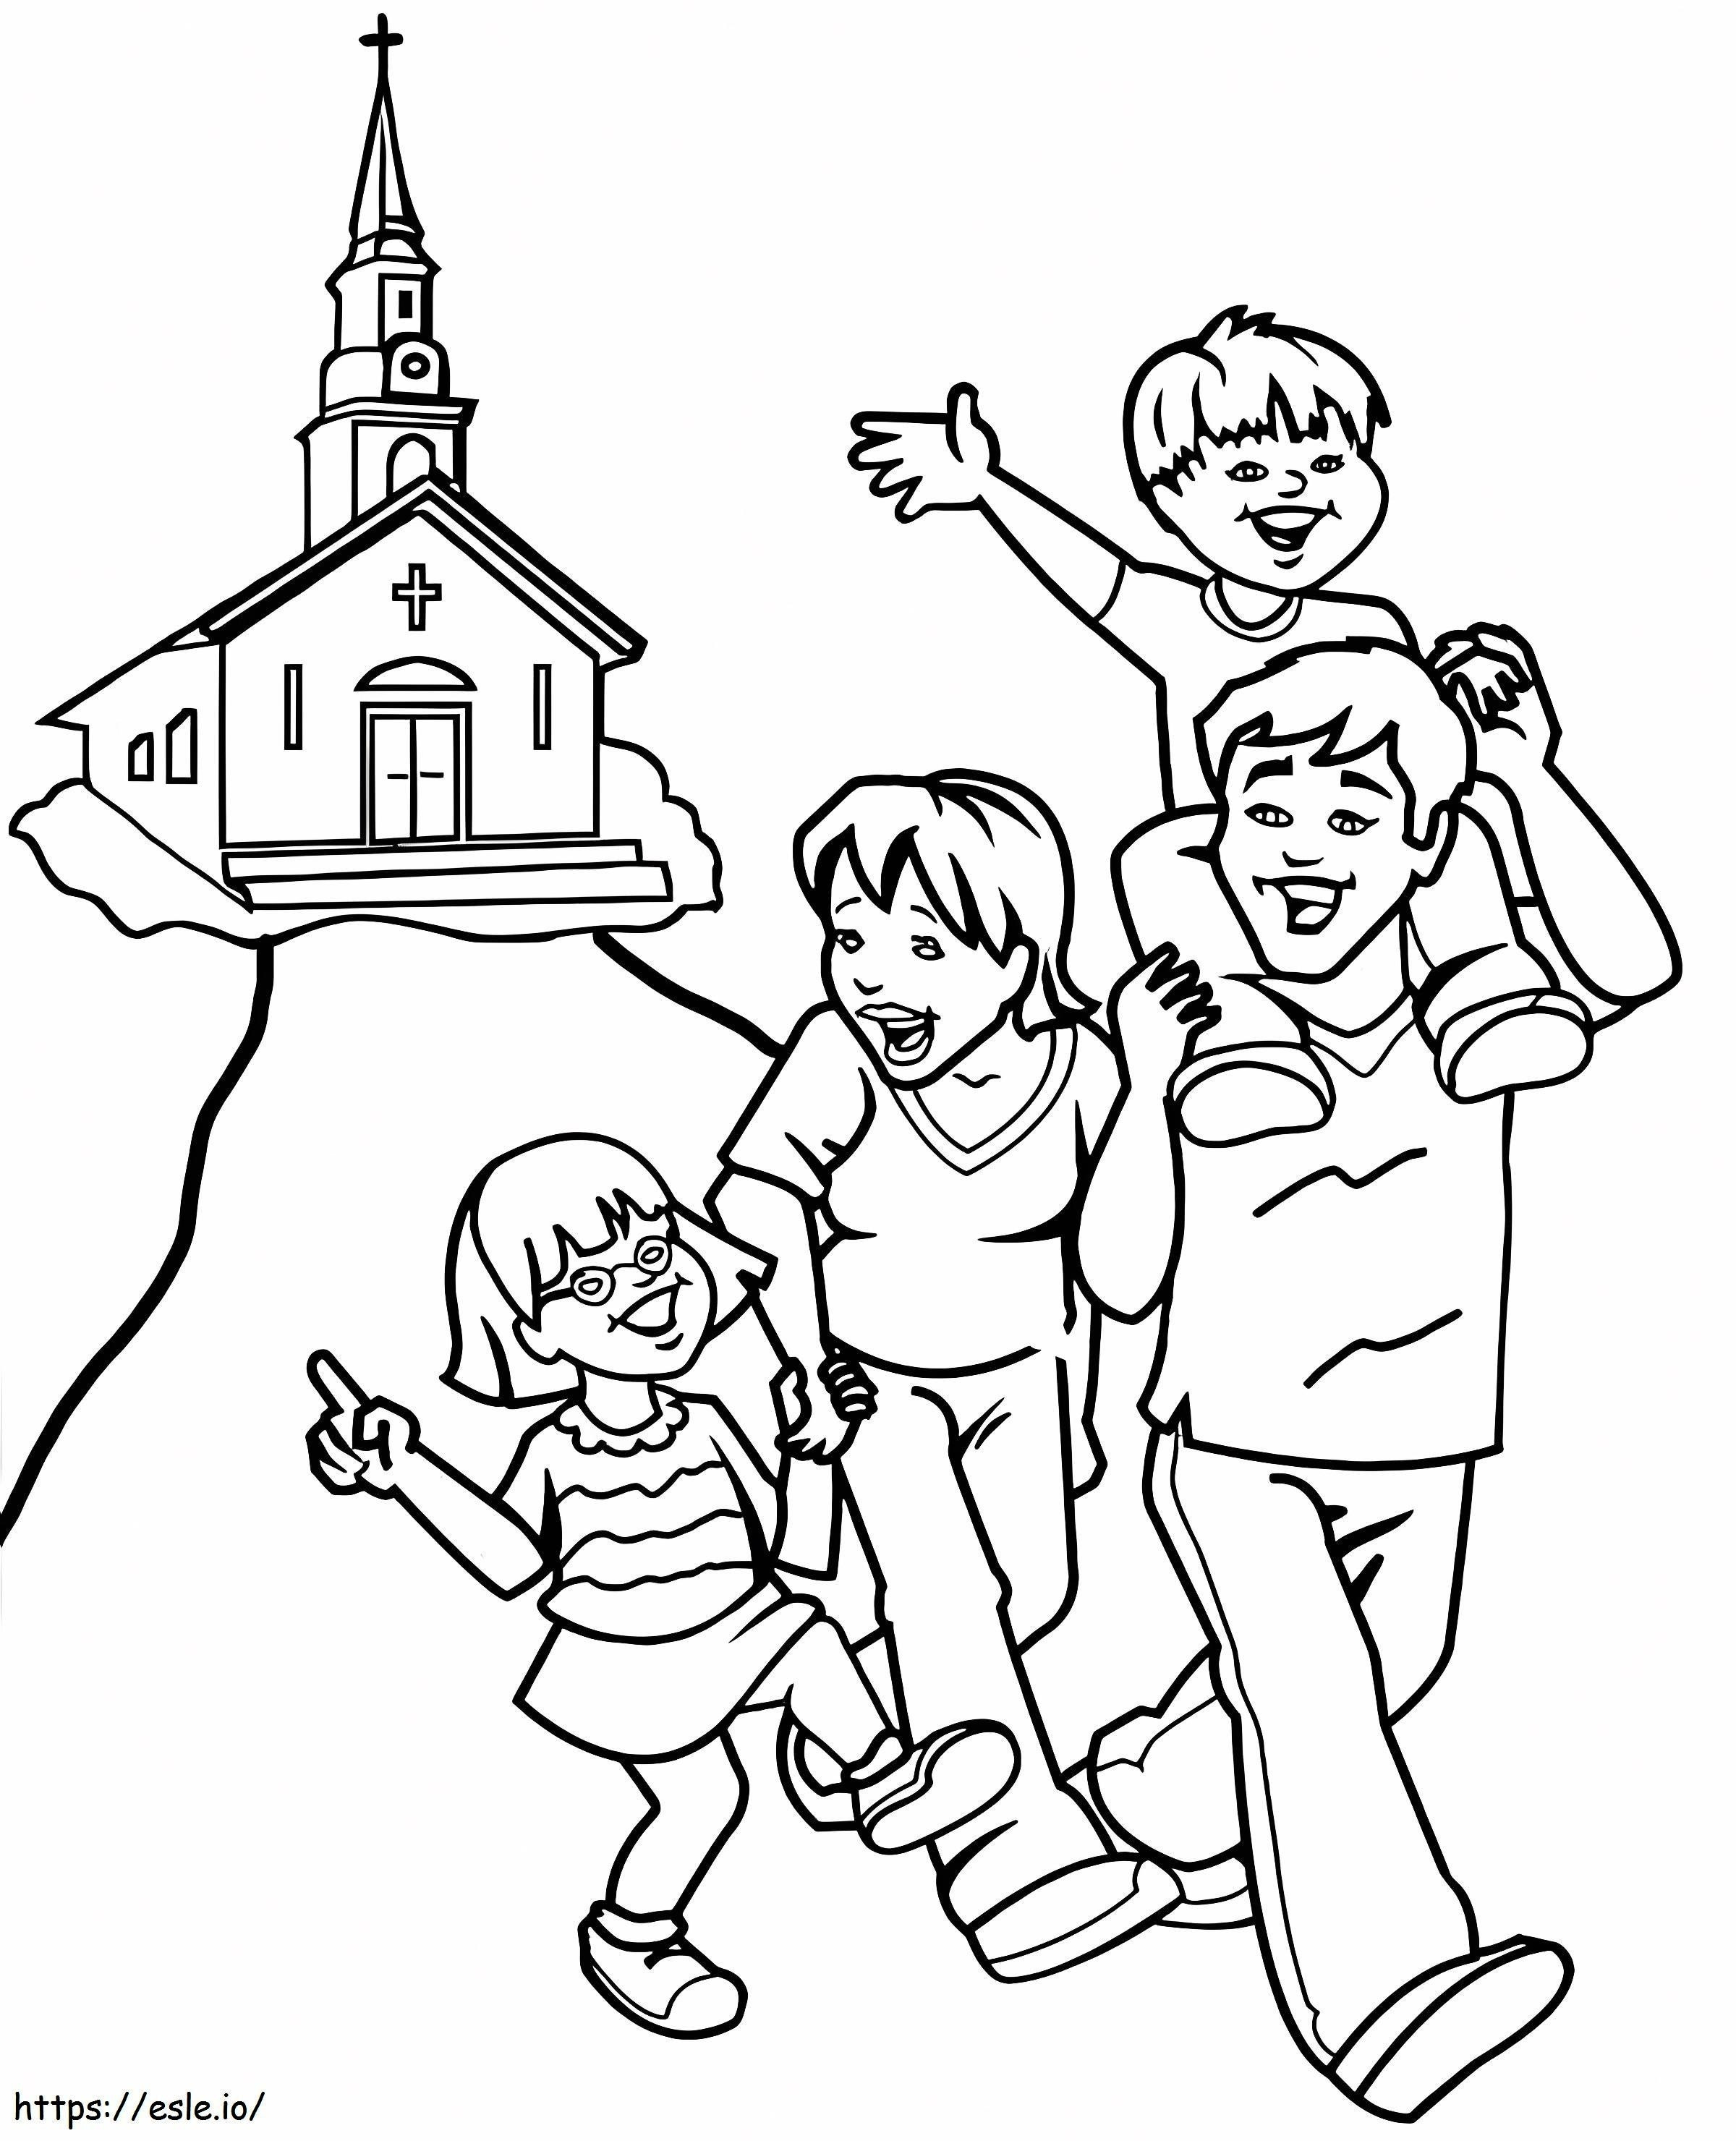 Family At Church coloring page